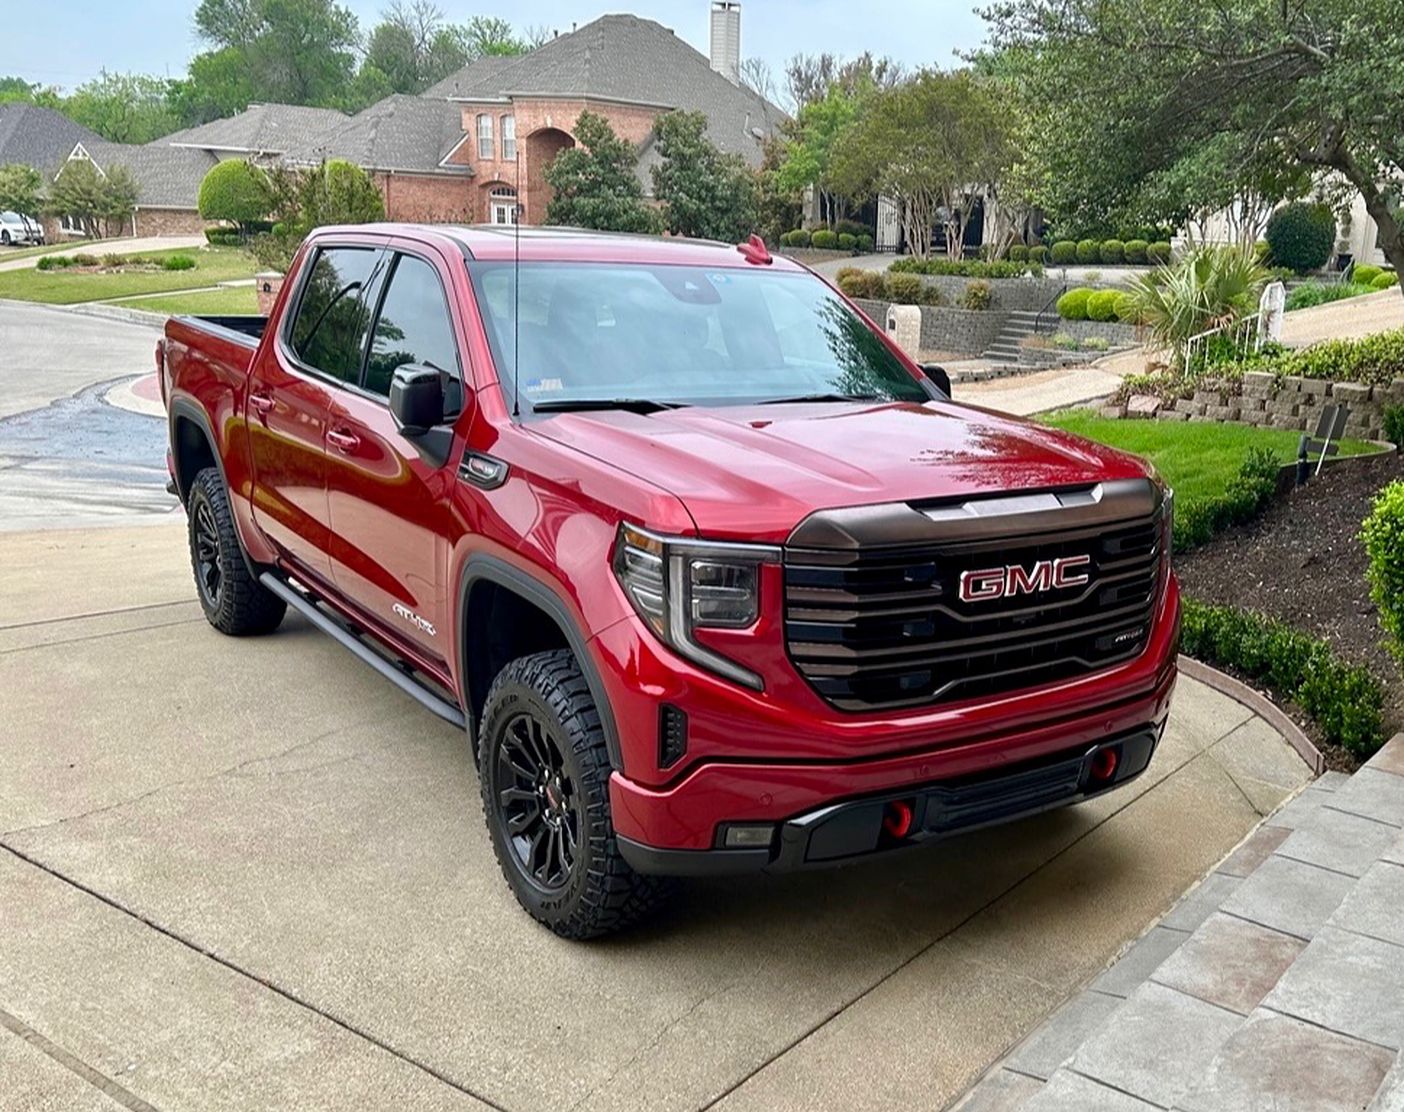 2023 GMC Sierra 1500 Review, Pricing, Pictures News, 52% OFF